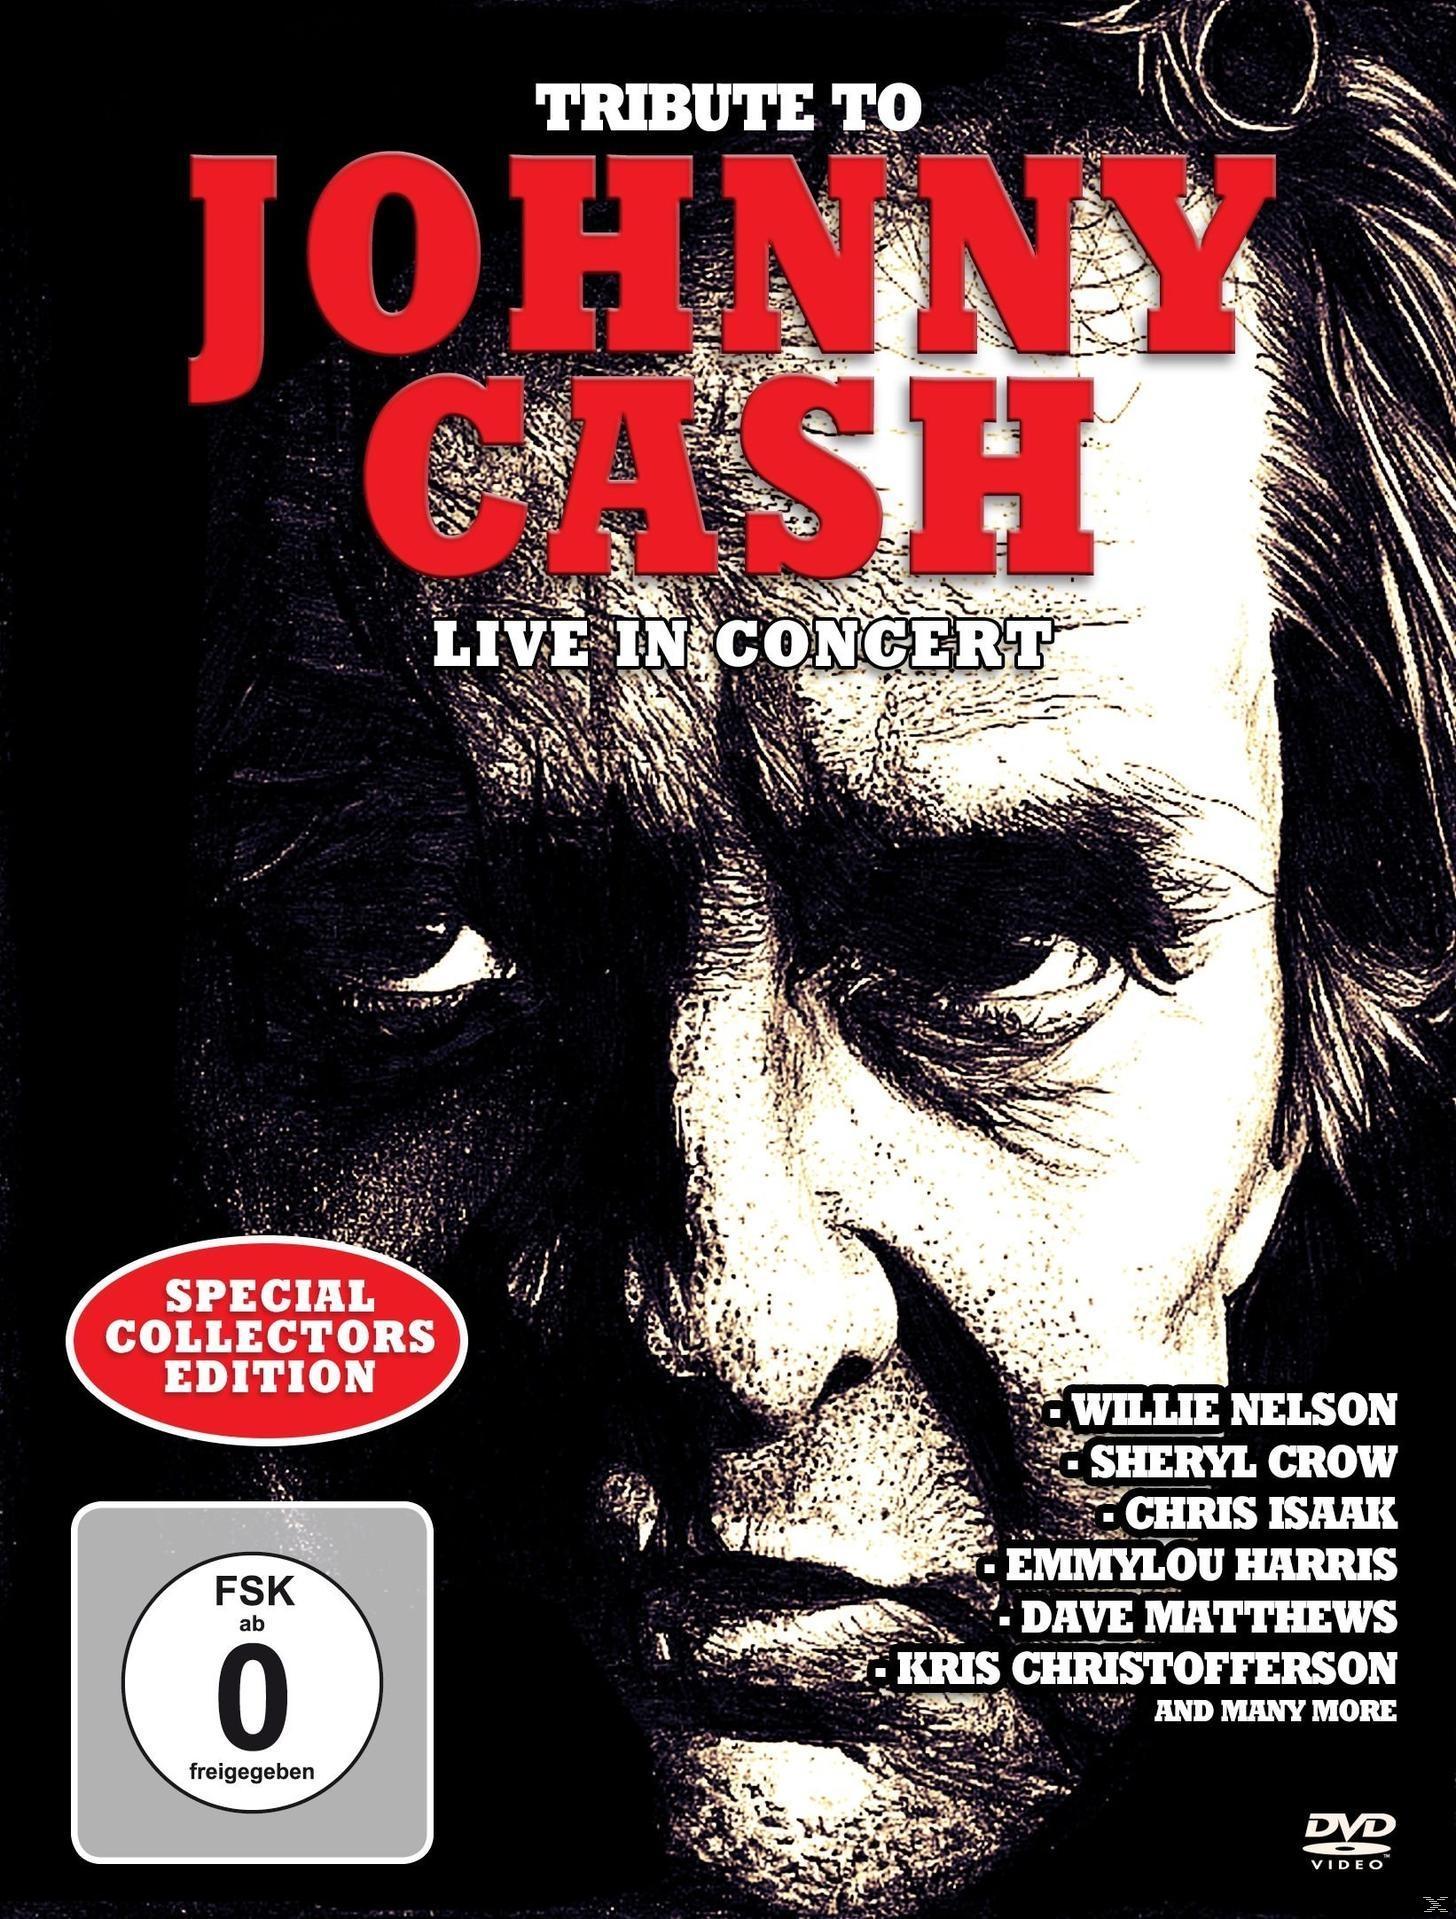 VARIOUS - Tribute To - (DVD) Johnny Cash